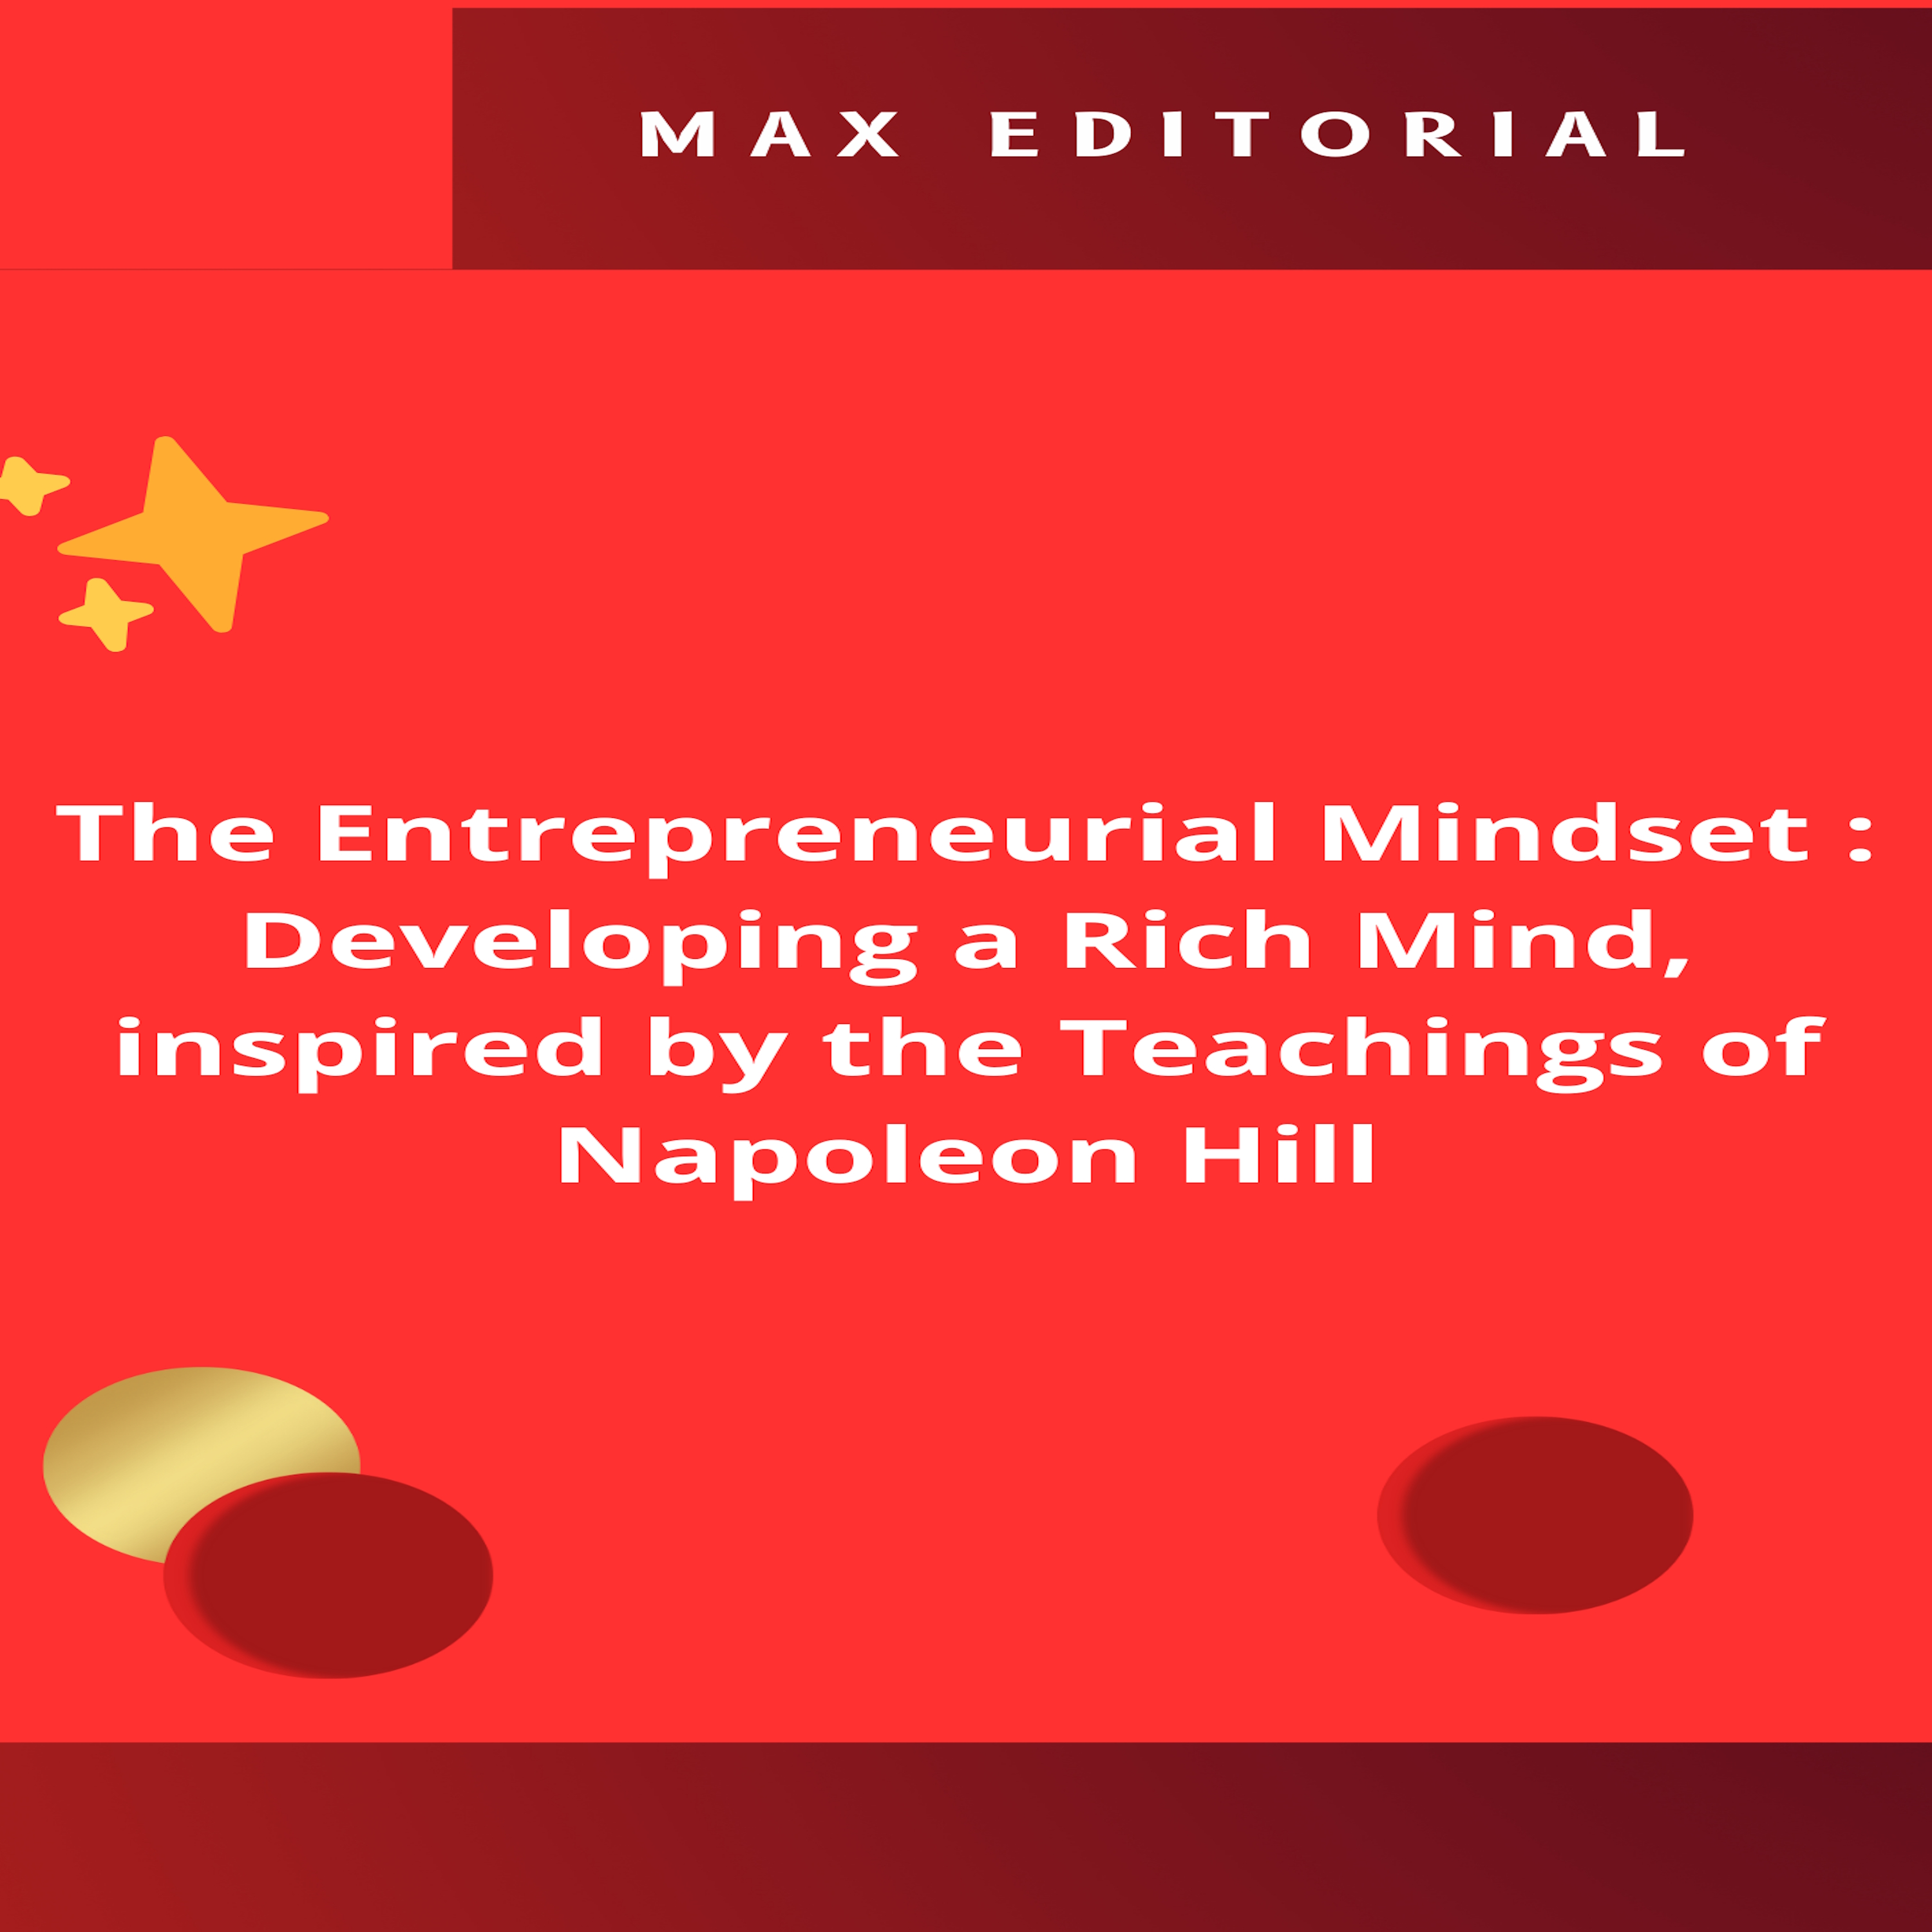 The Entrepreneurial Mindset : Developing a Rich Mind, inspired by the Teachings of Napoleon Hill.